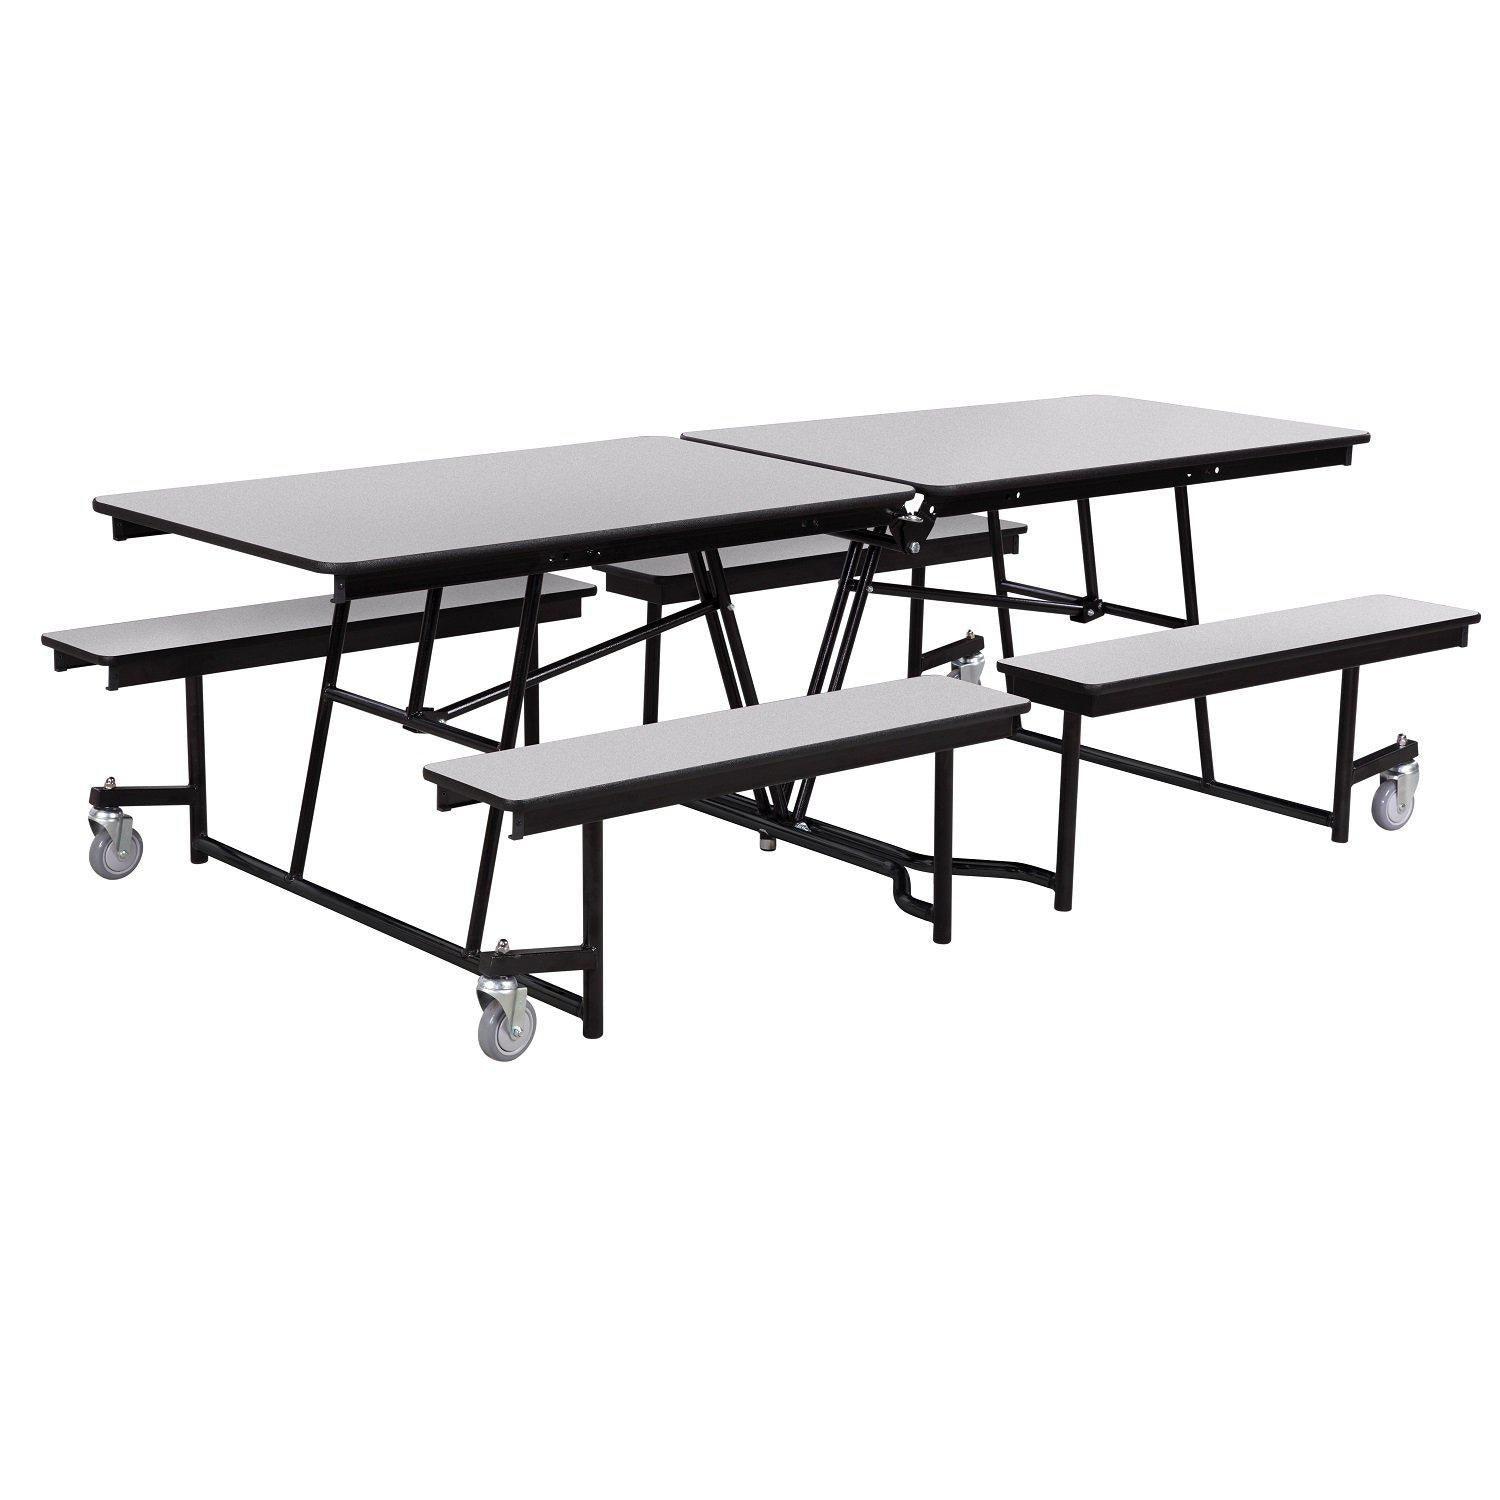 Mobile Cafeteria Table with Benches, 8'L, Plywood Core, Vinyl T-Mold Edge, Textured Black Frame